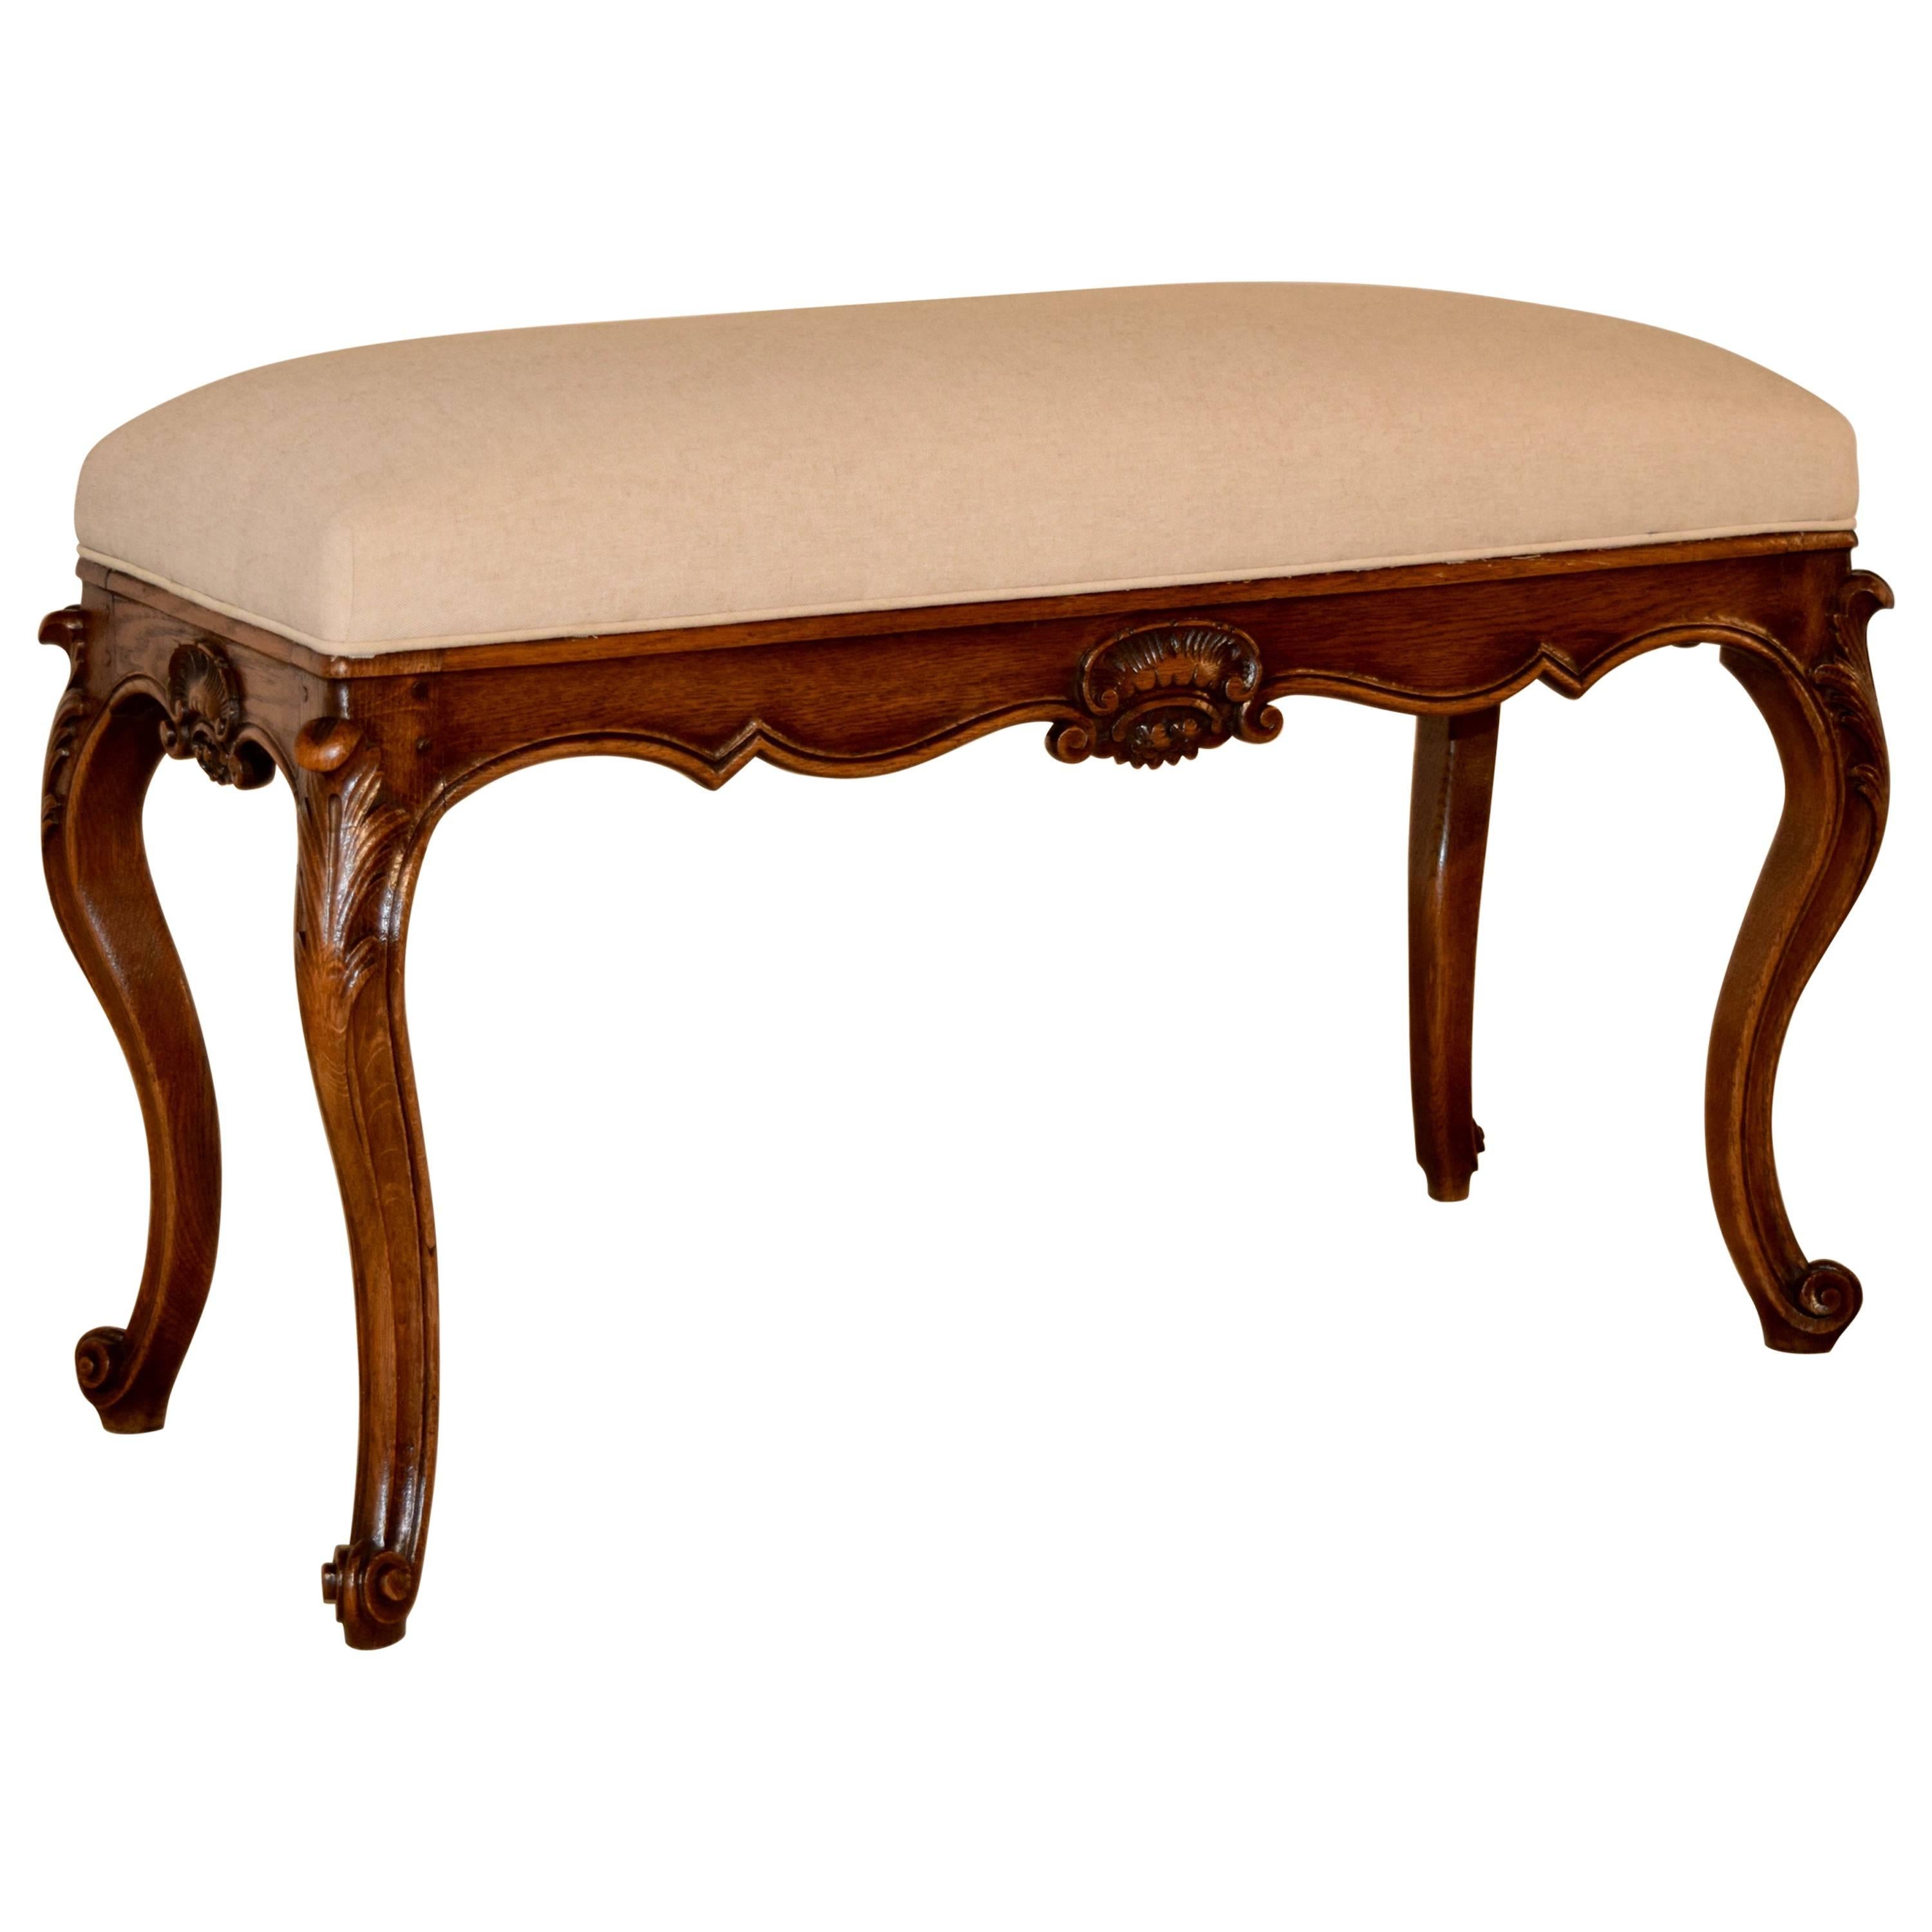 19th Century French Upholstered Bench